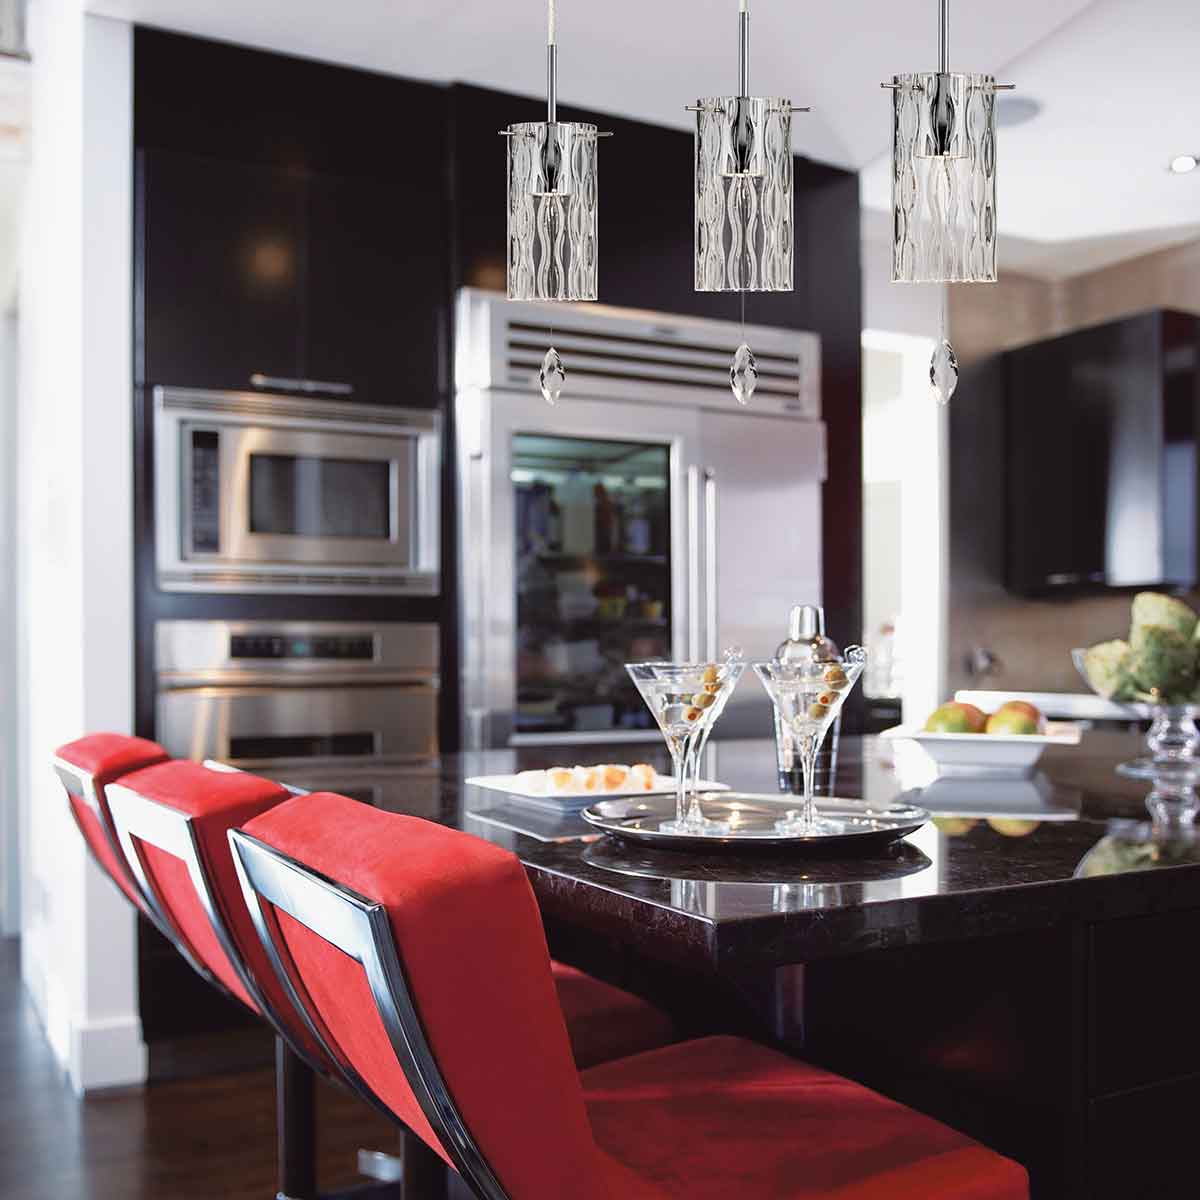 Our kitchen lighting design rules of thumb will help you design a beautiful kitchen like the one pictured here.